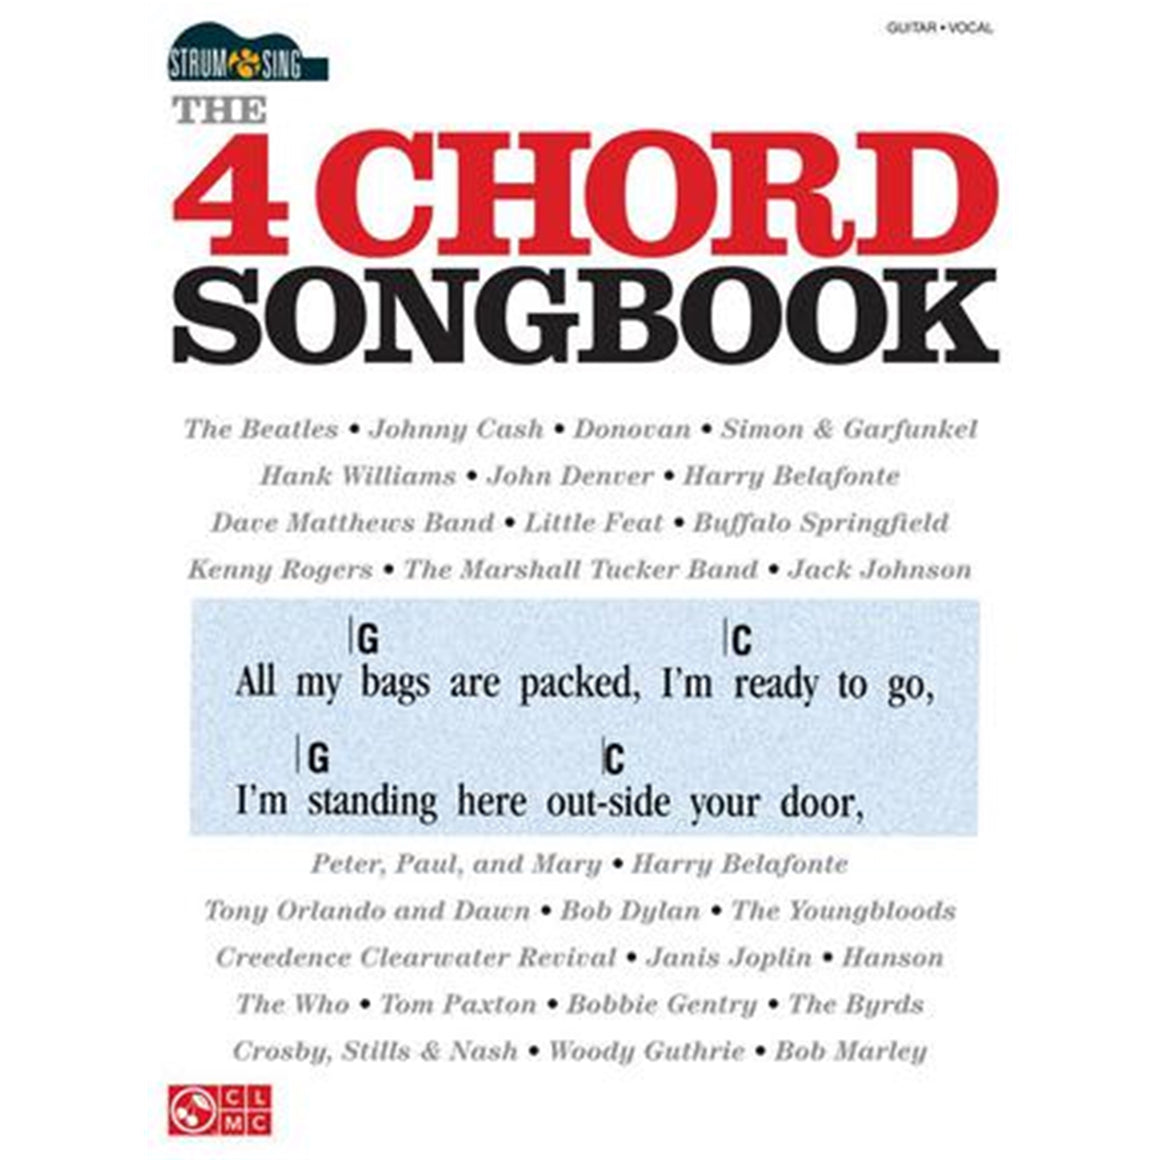 CHERRY LANE 2501533 The 4 Chord Songbook